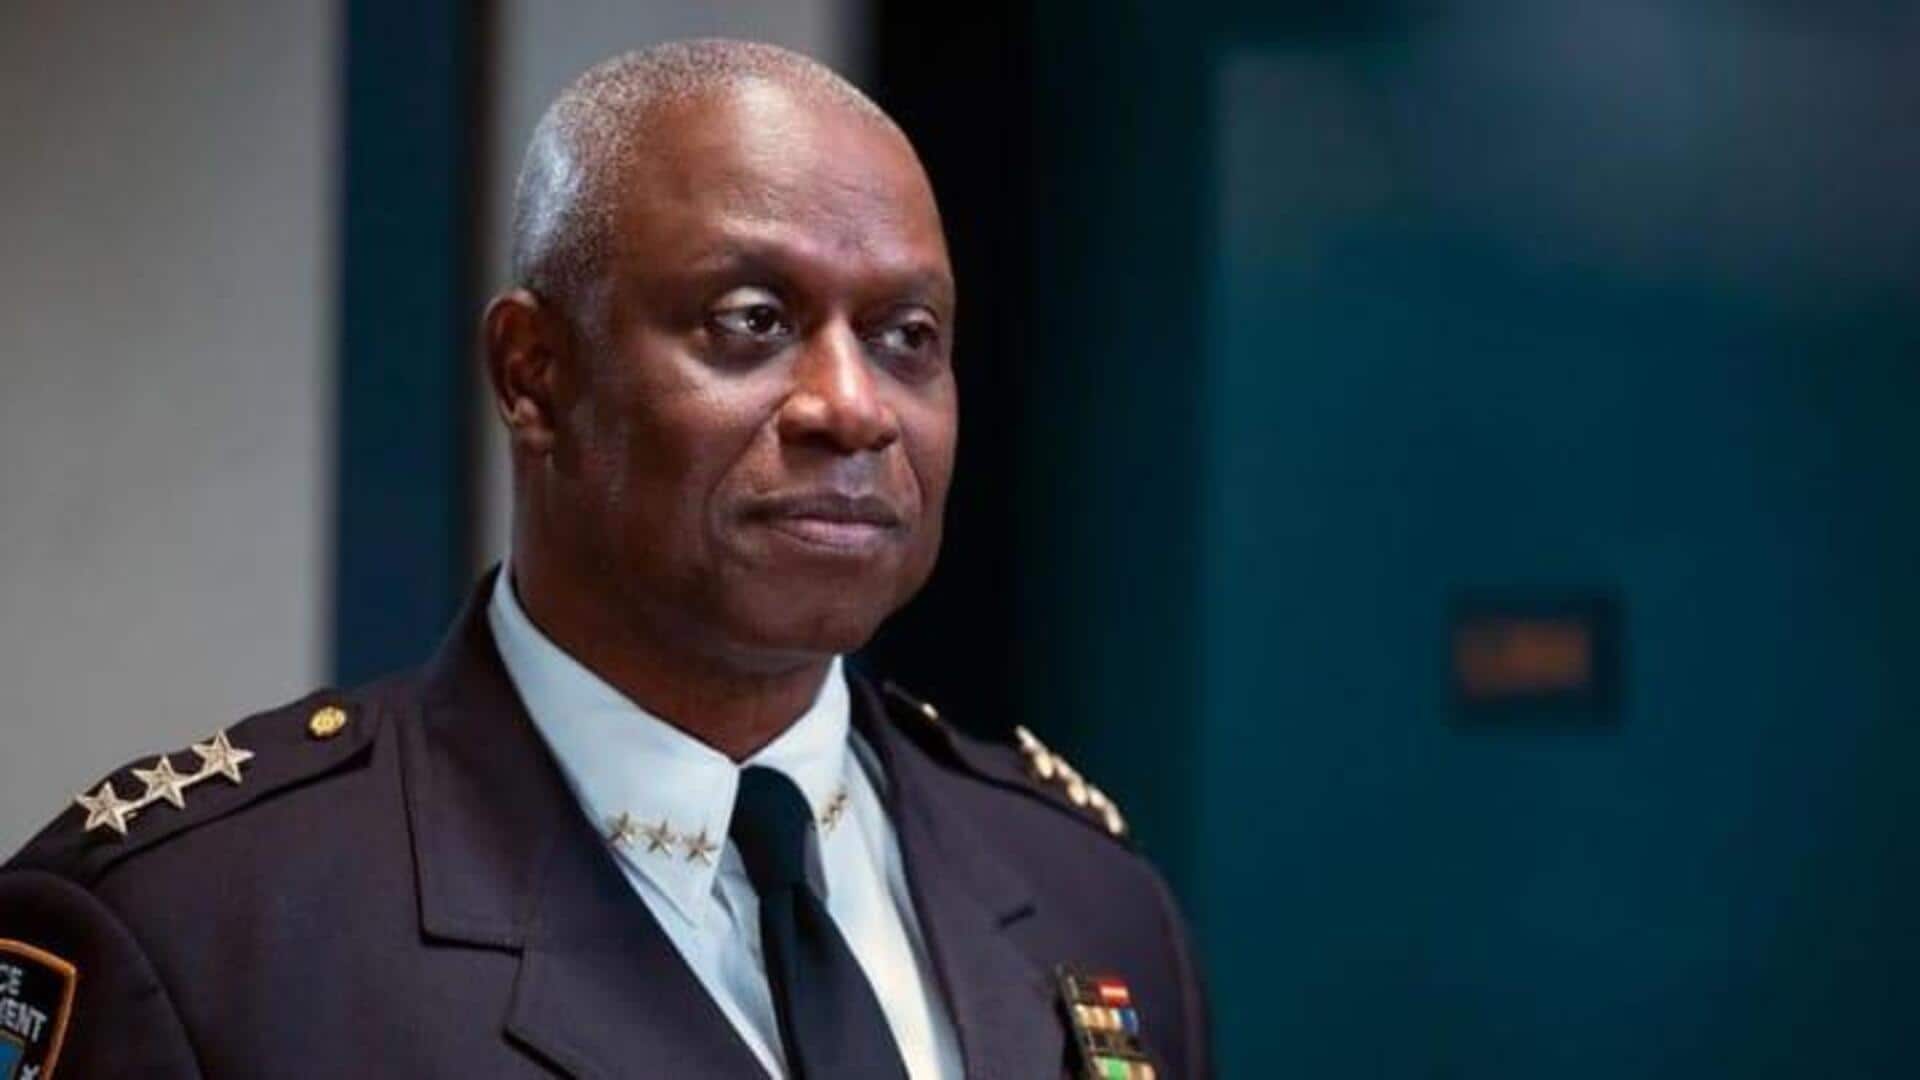 'Brooklyn Nine-Nine' actor André Braugher died due to lung cancer